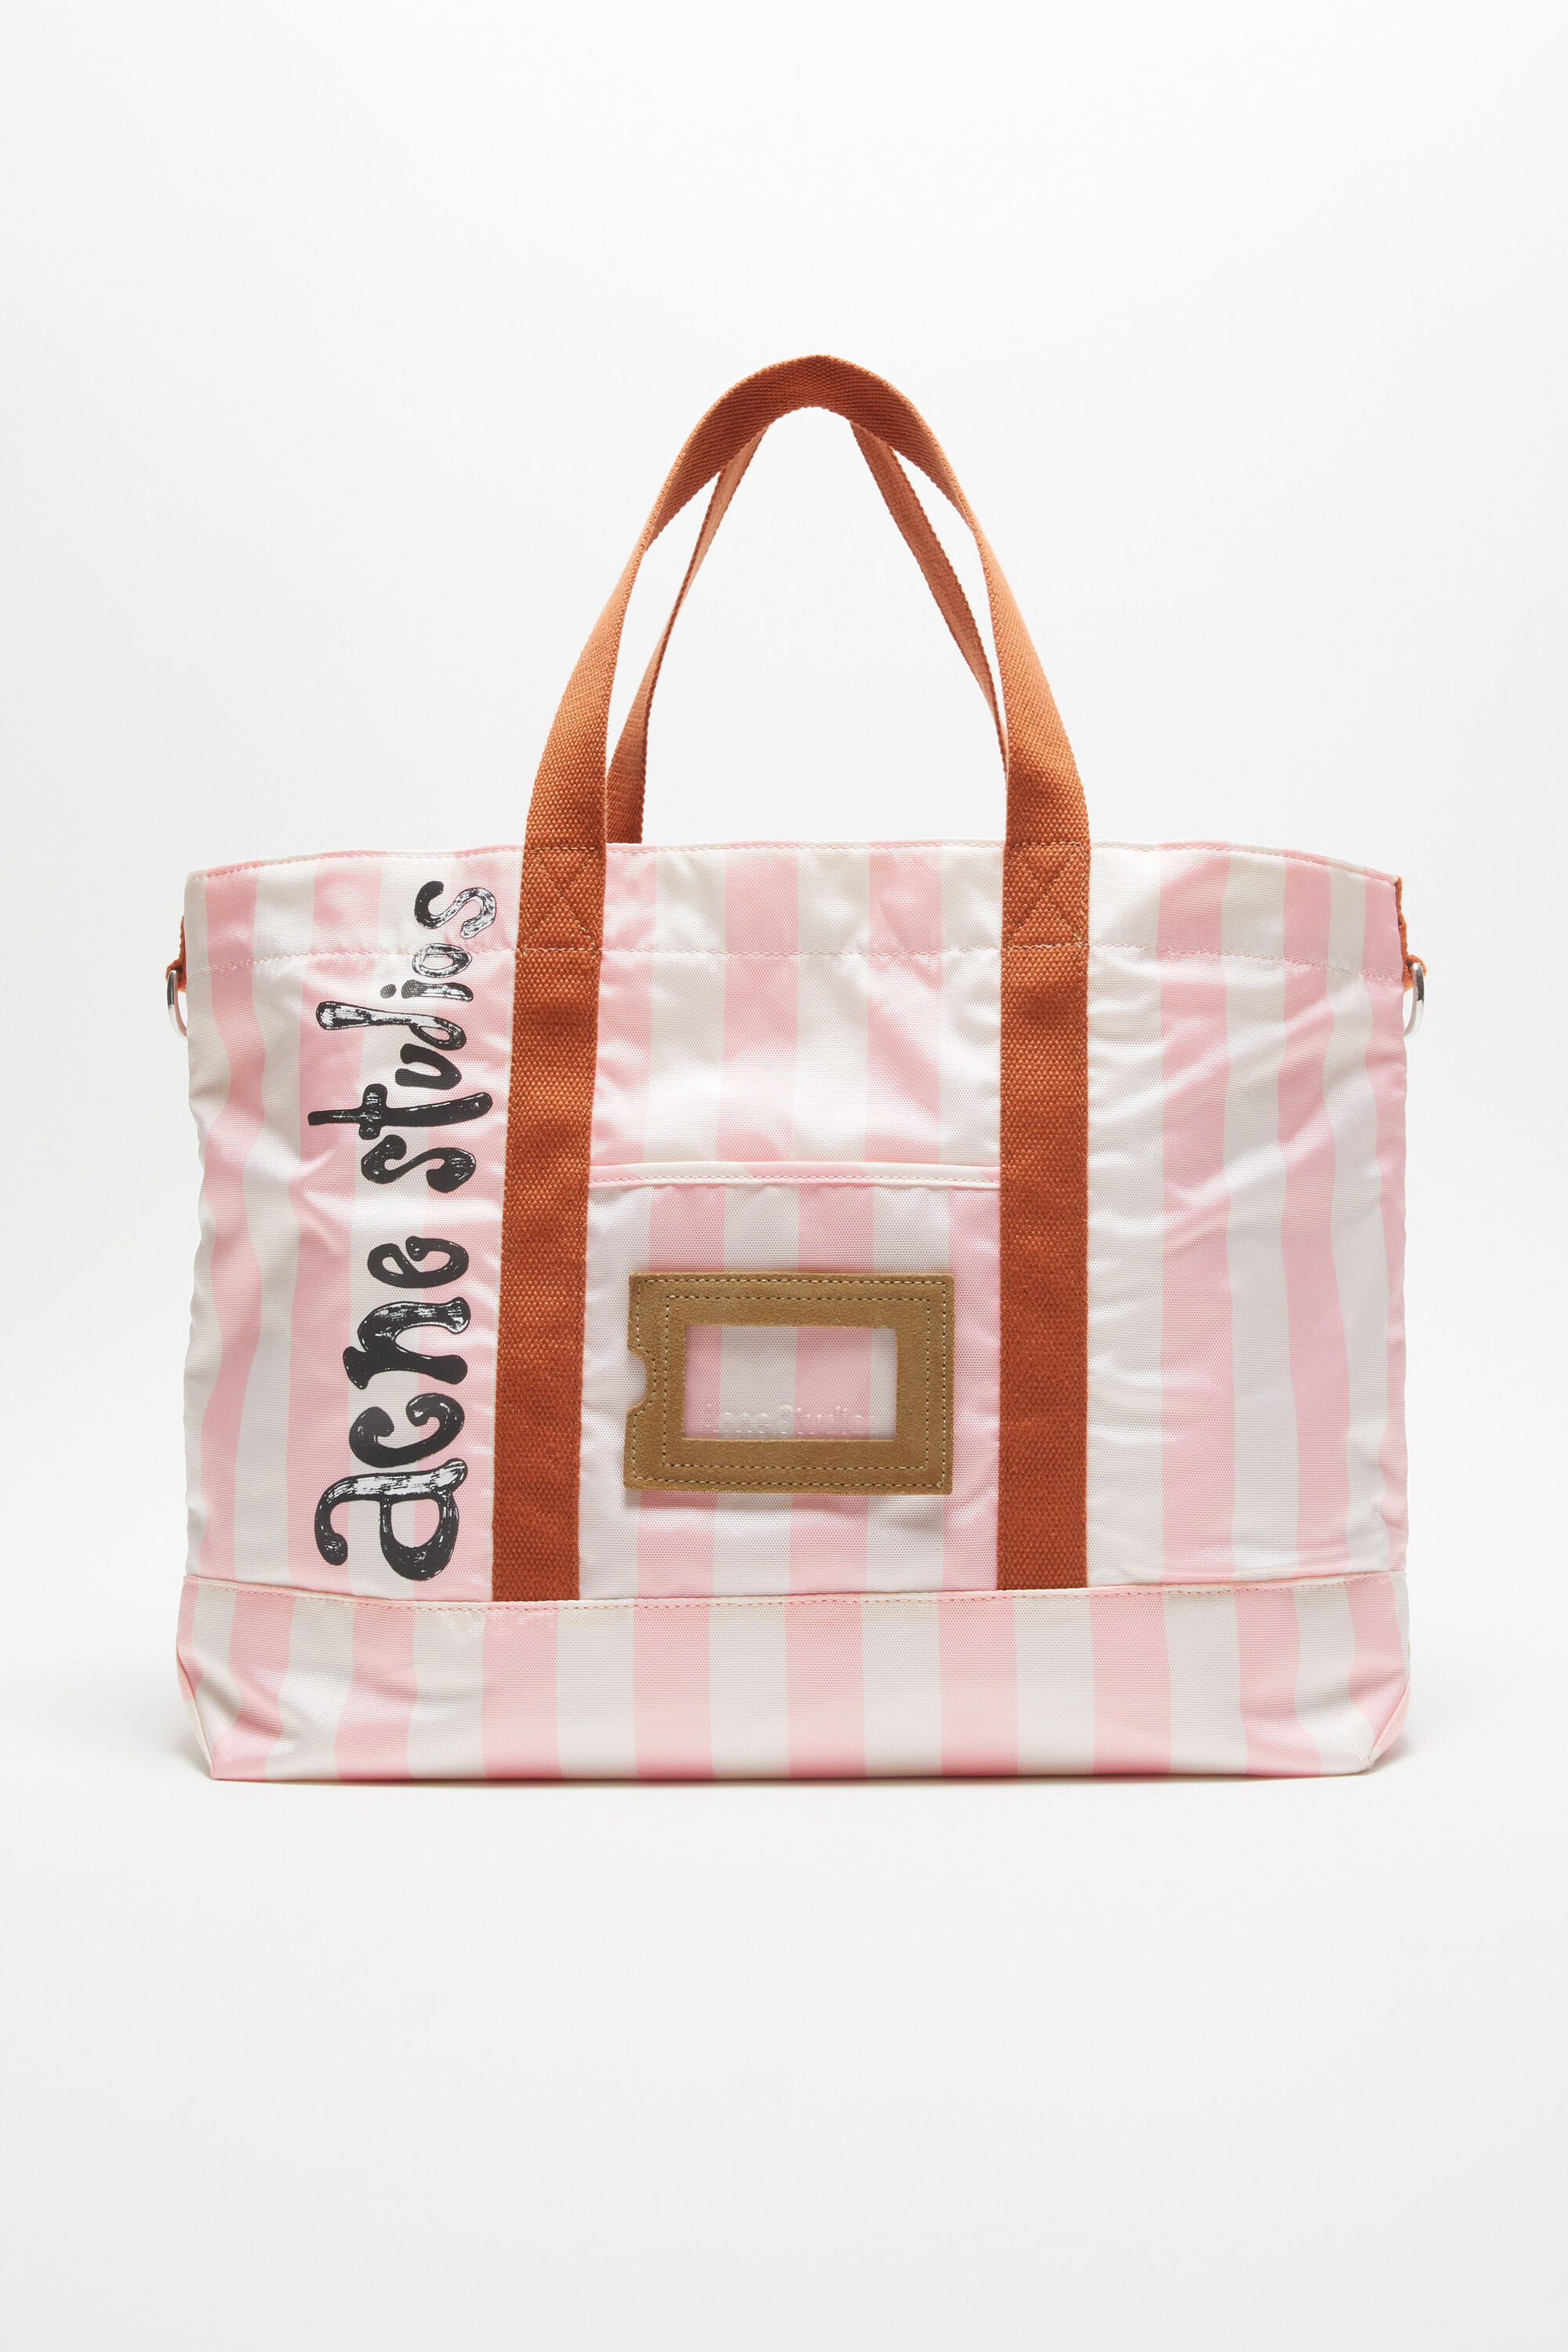 Acne Studios - Tote bag - Light pink/off white